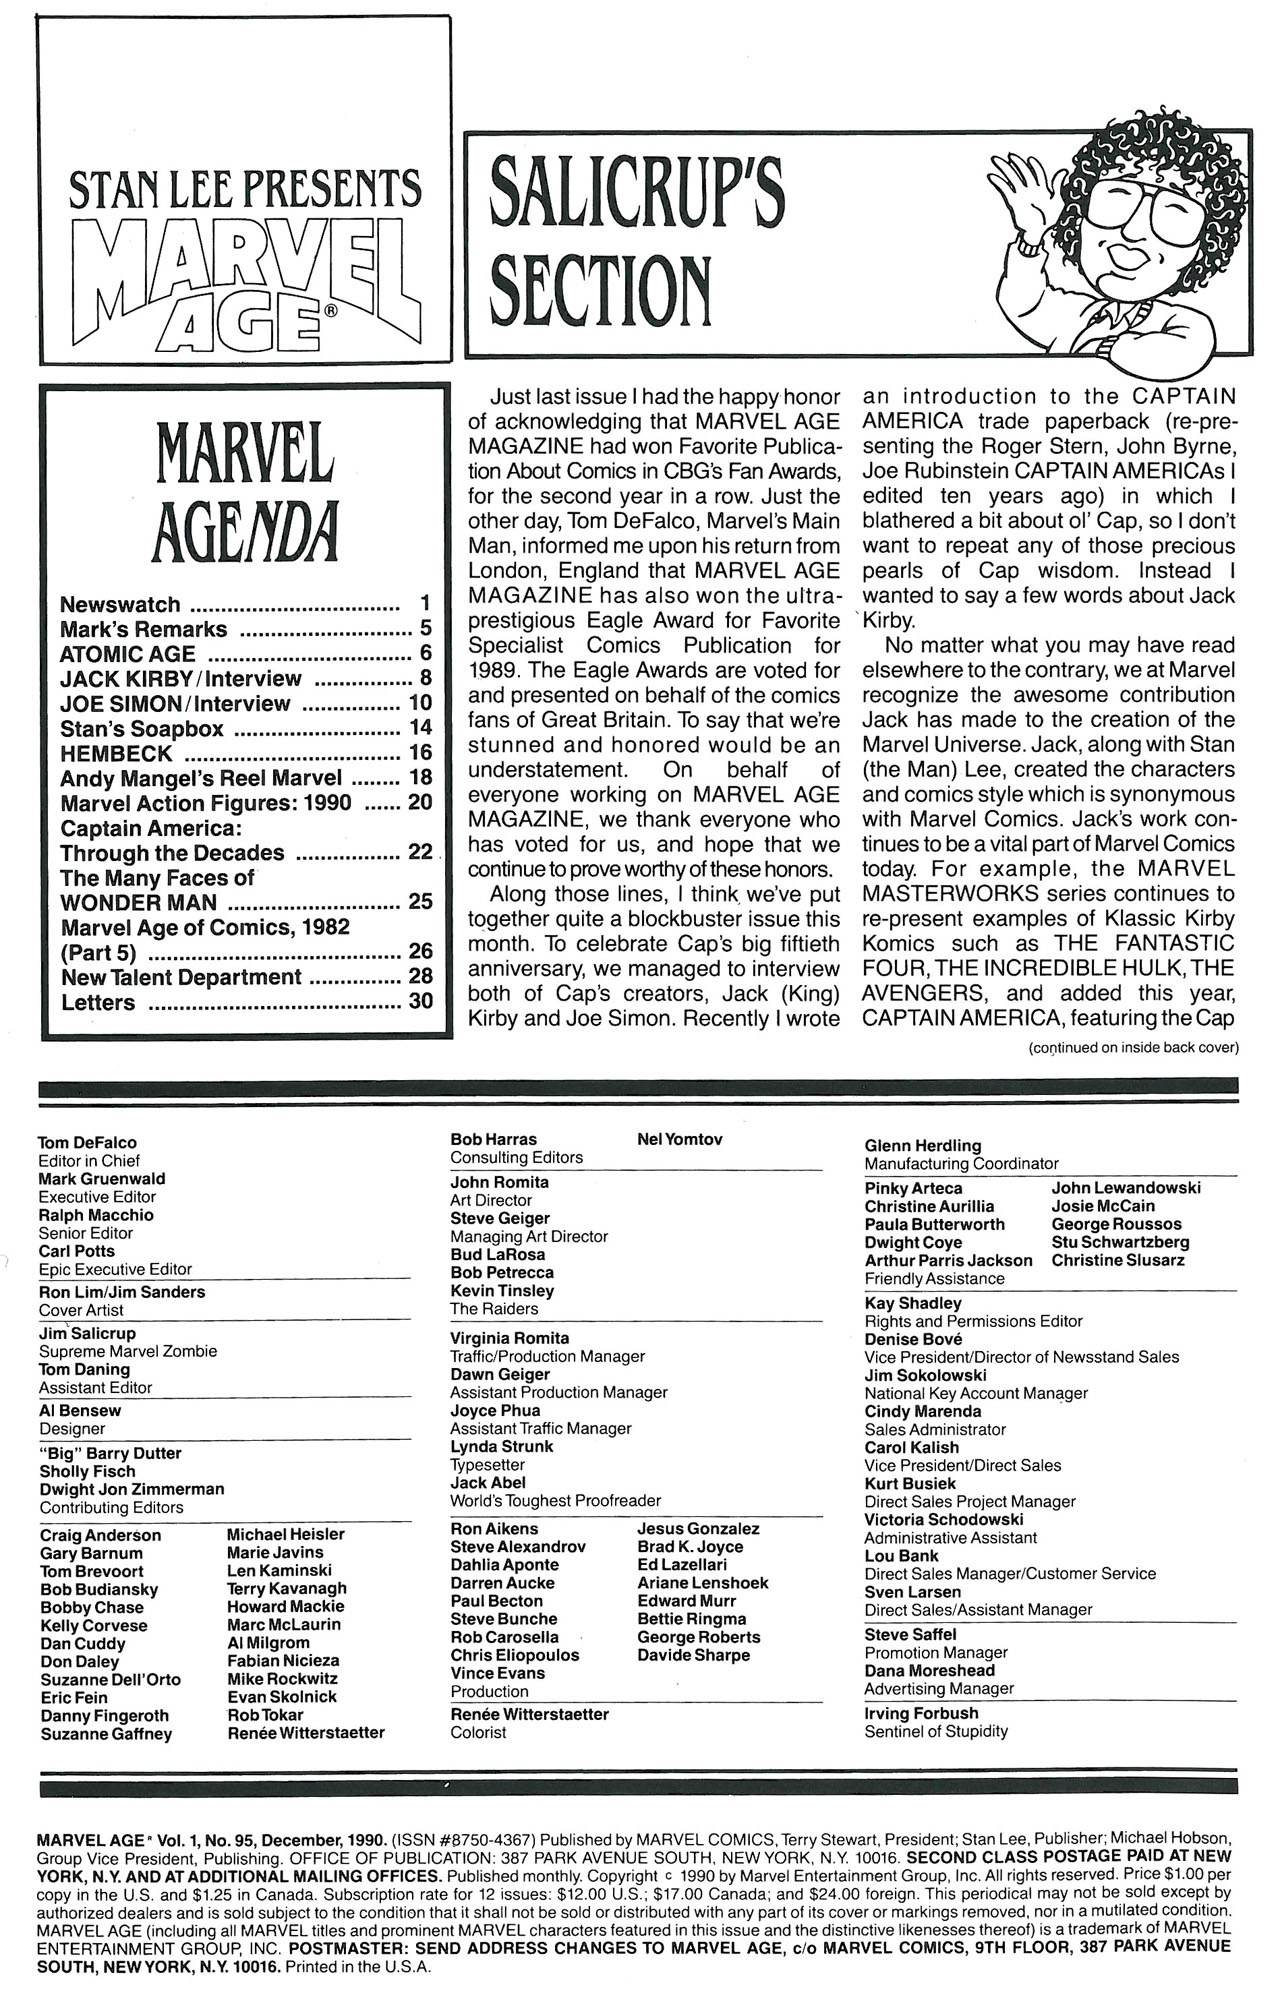 Read online Marvel Age comic -  Issue #95 - 2